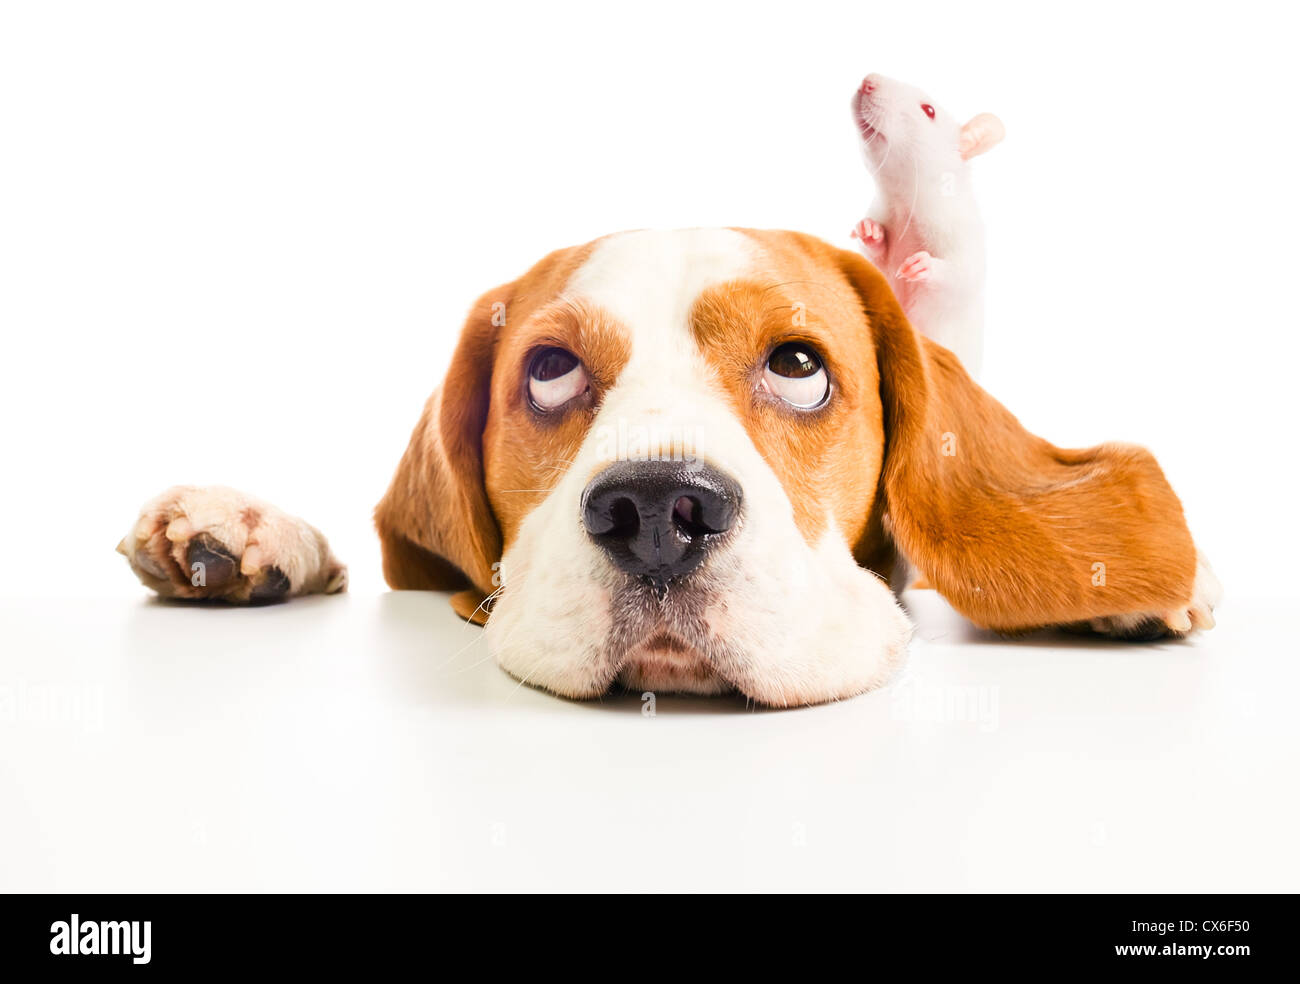 The dog and rat look in top , isolated on a white background Stock Photo